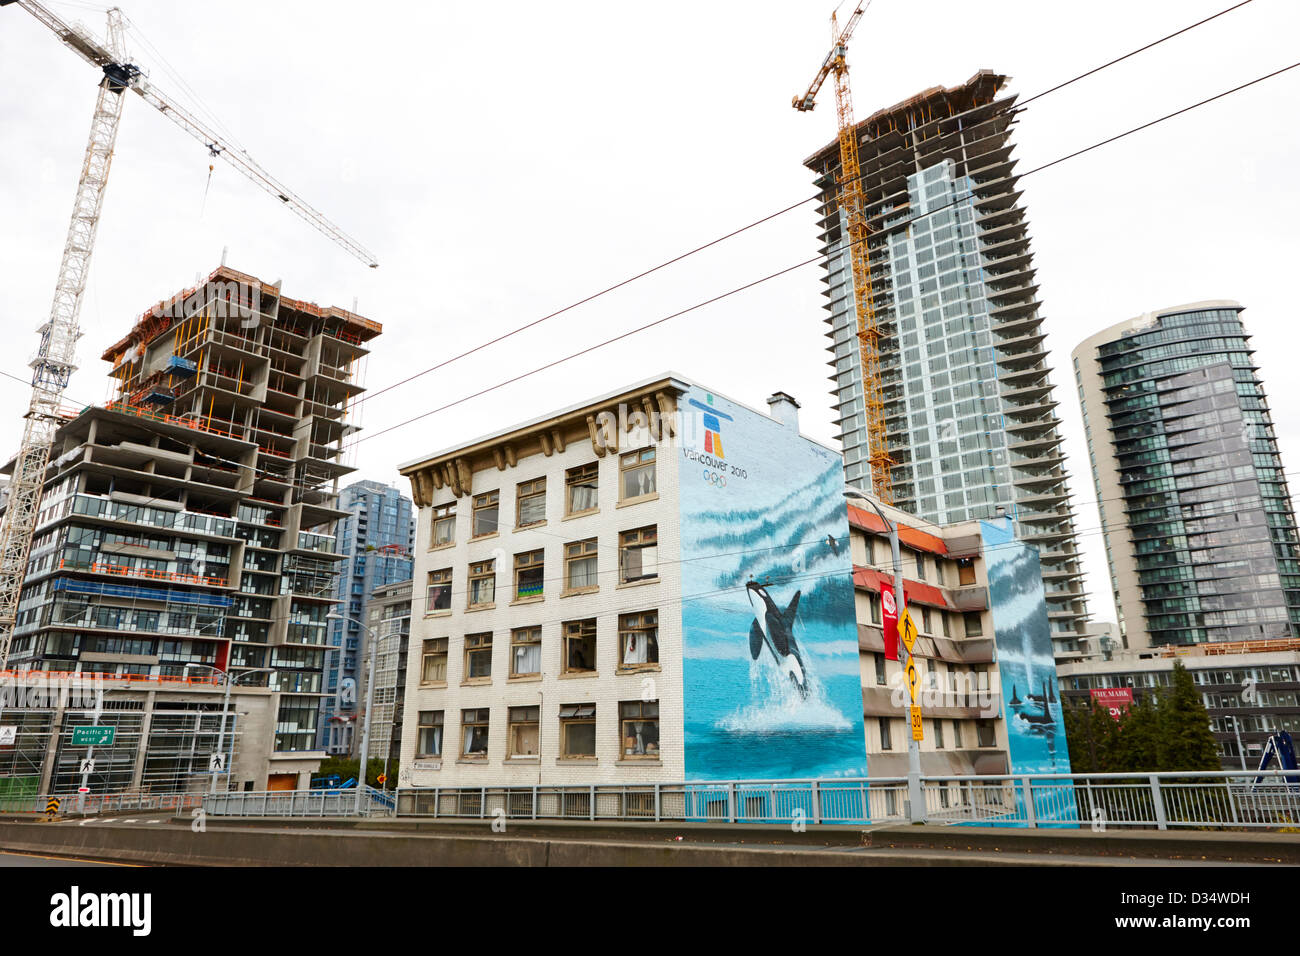 wyland orcas mural on old continental hotel in front of the mark new condo project granville street yaletown Vancouver BC Canada Stock Photo